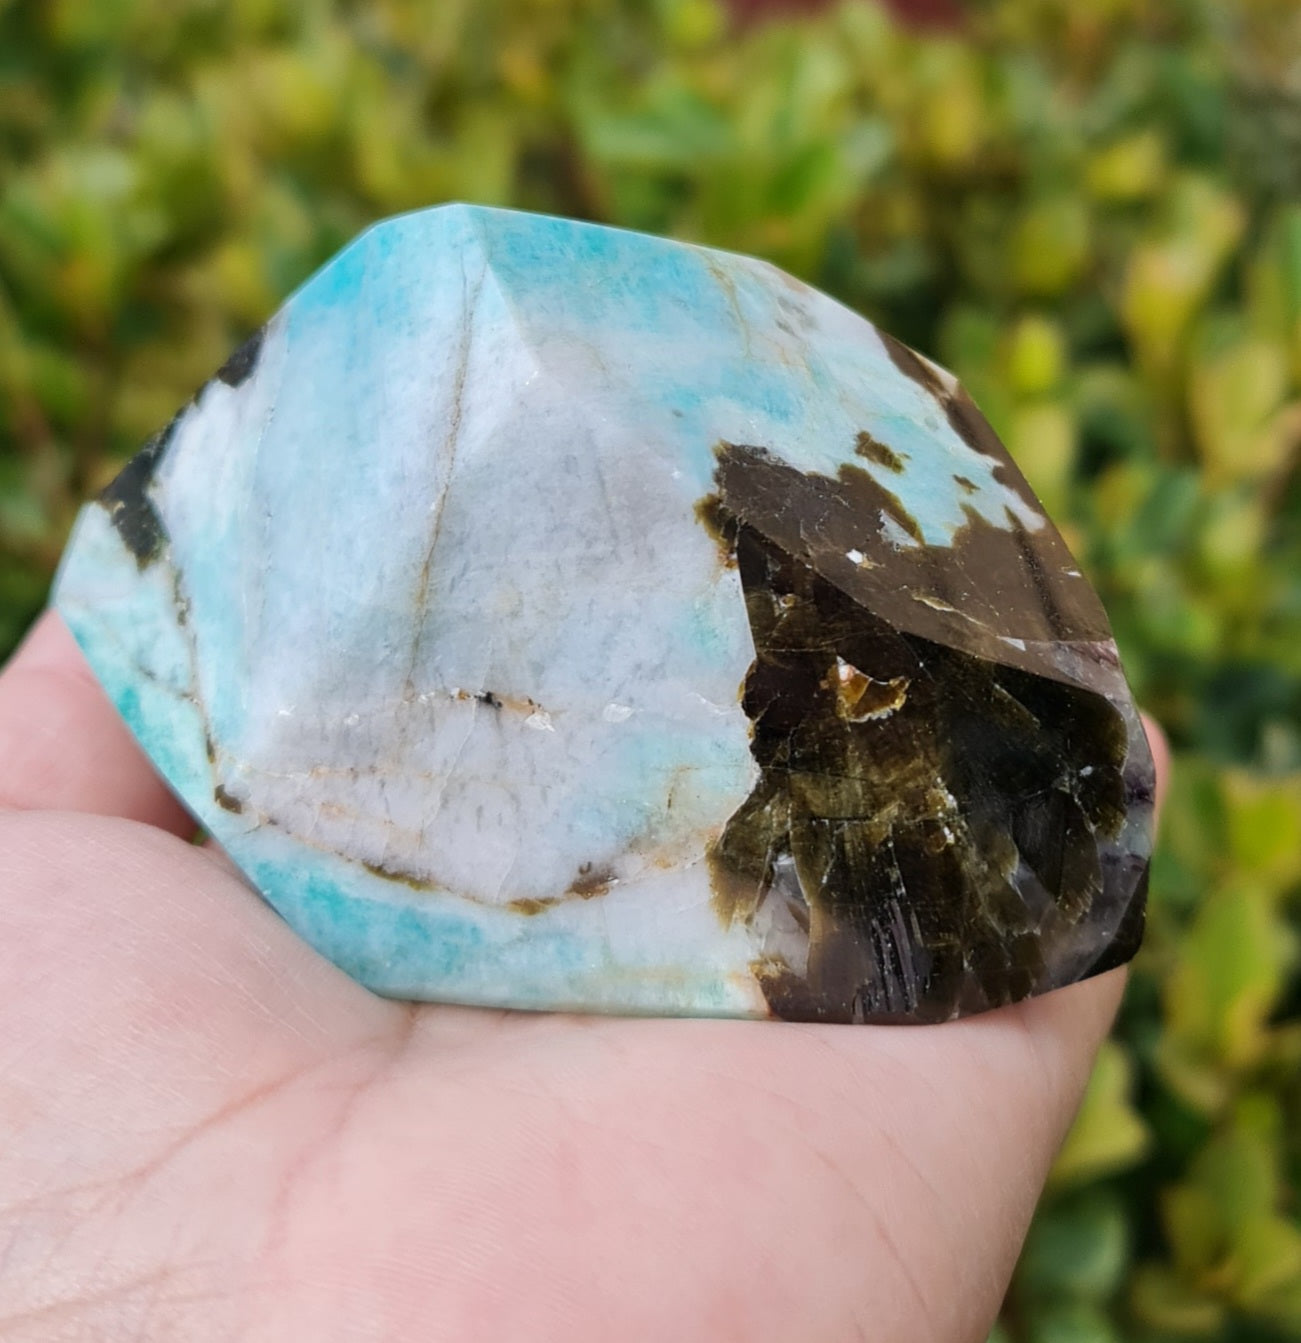 Amazonite with Epidote, Smoky and Clear Quartz and Lepidolite